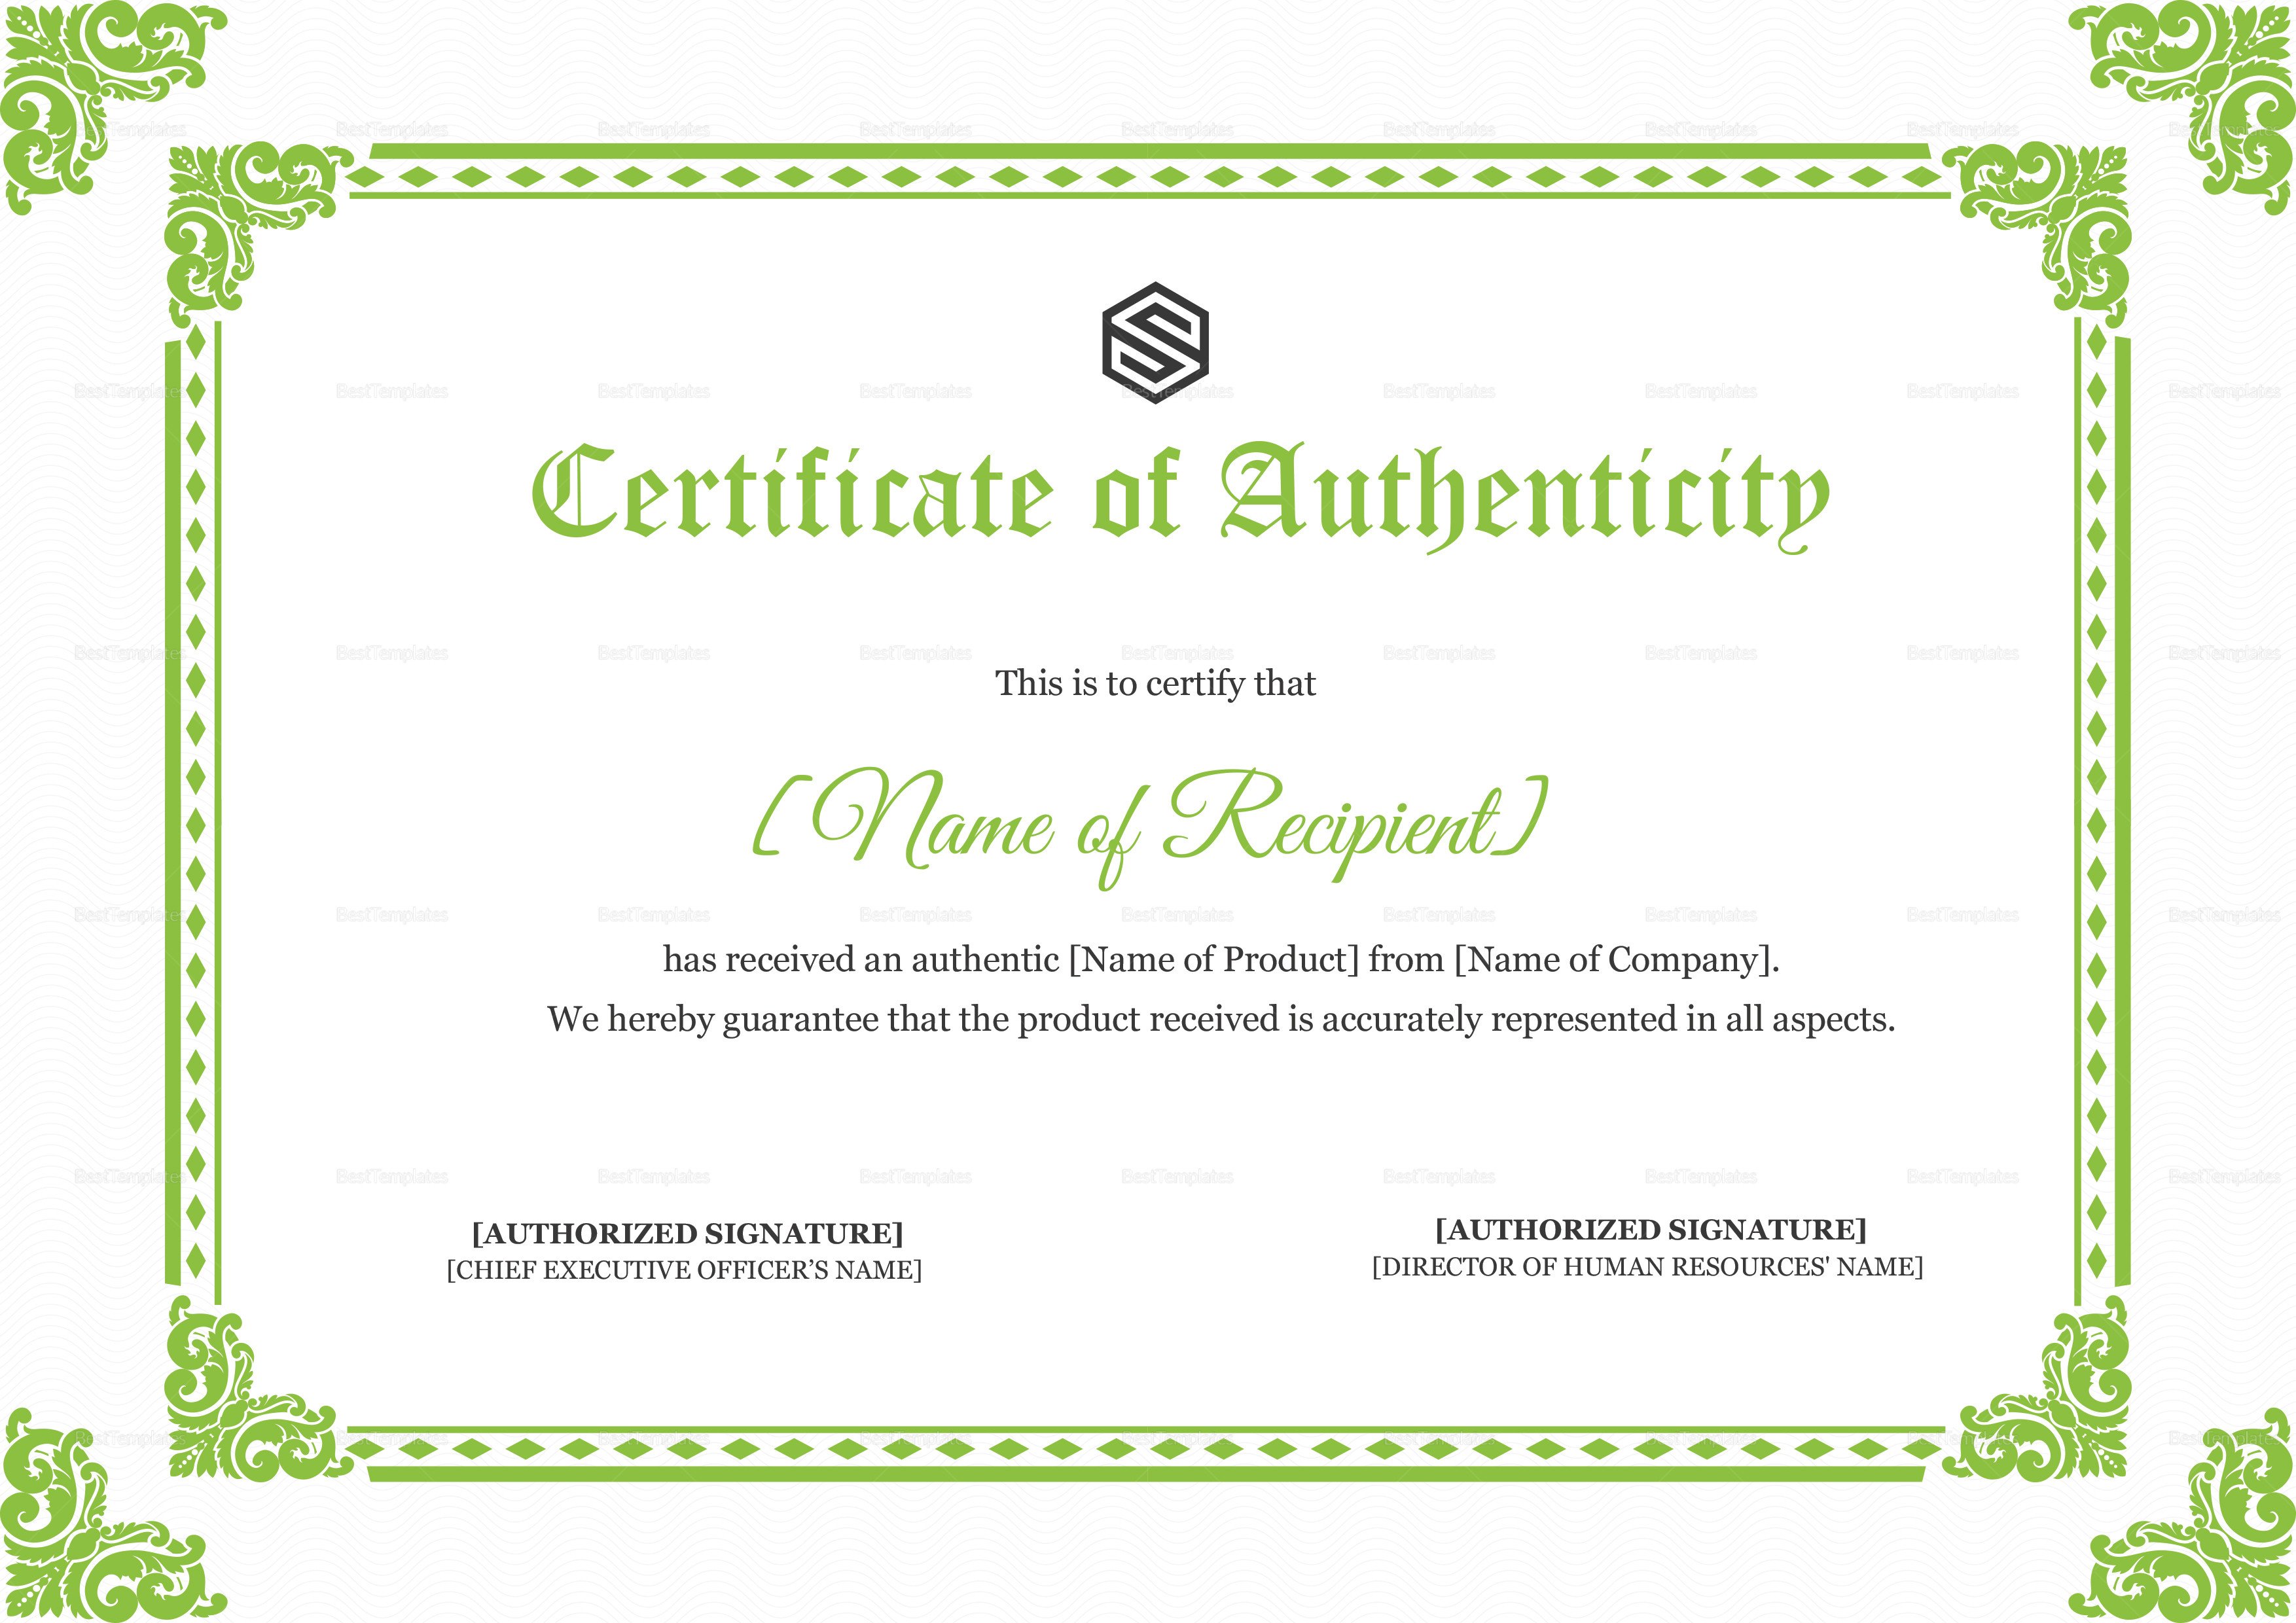 Certificate of Authenticity Design Template in PSD Word